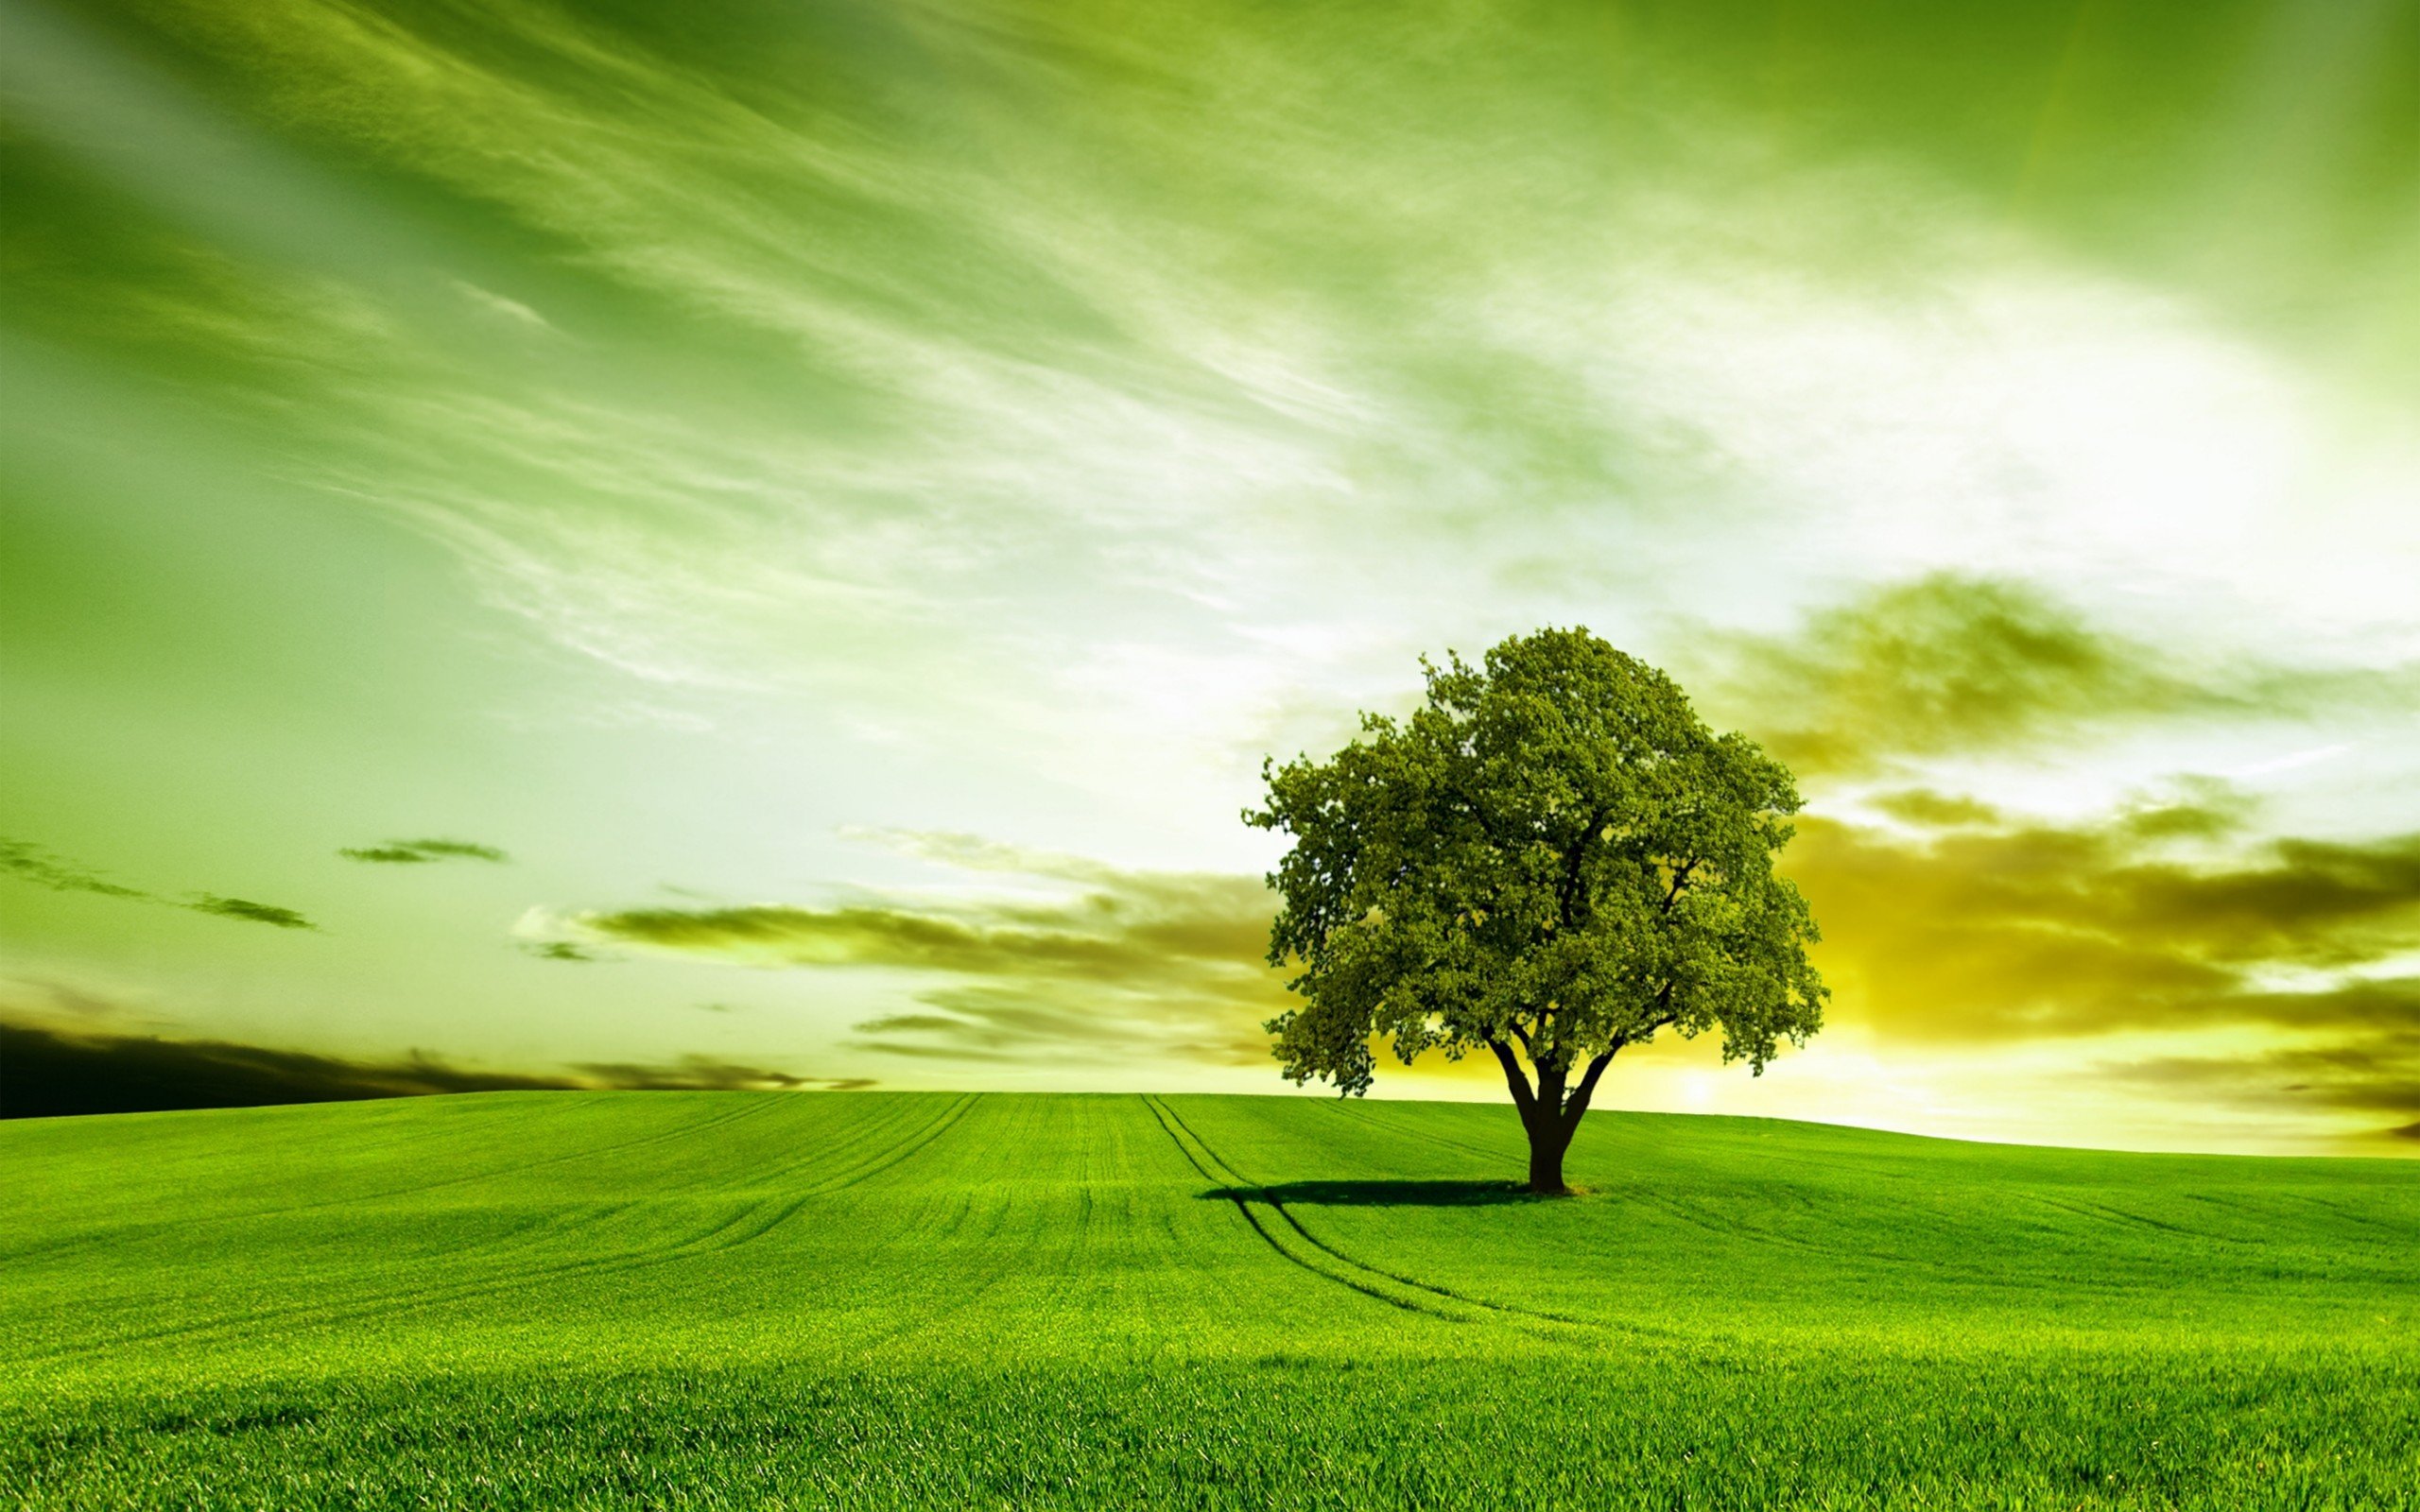 Wallpapers green nature sky on the desktop